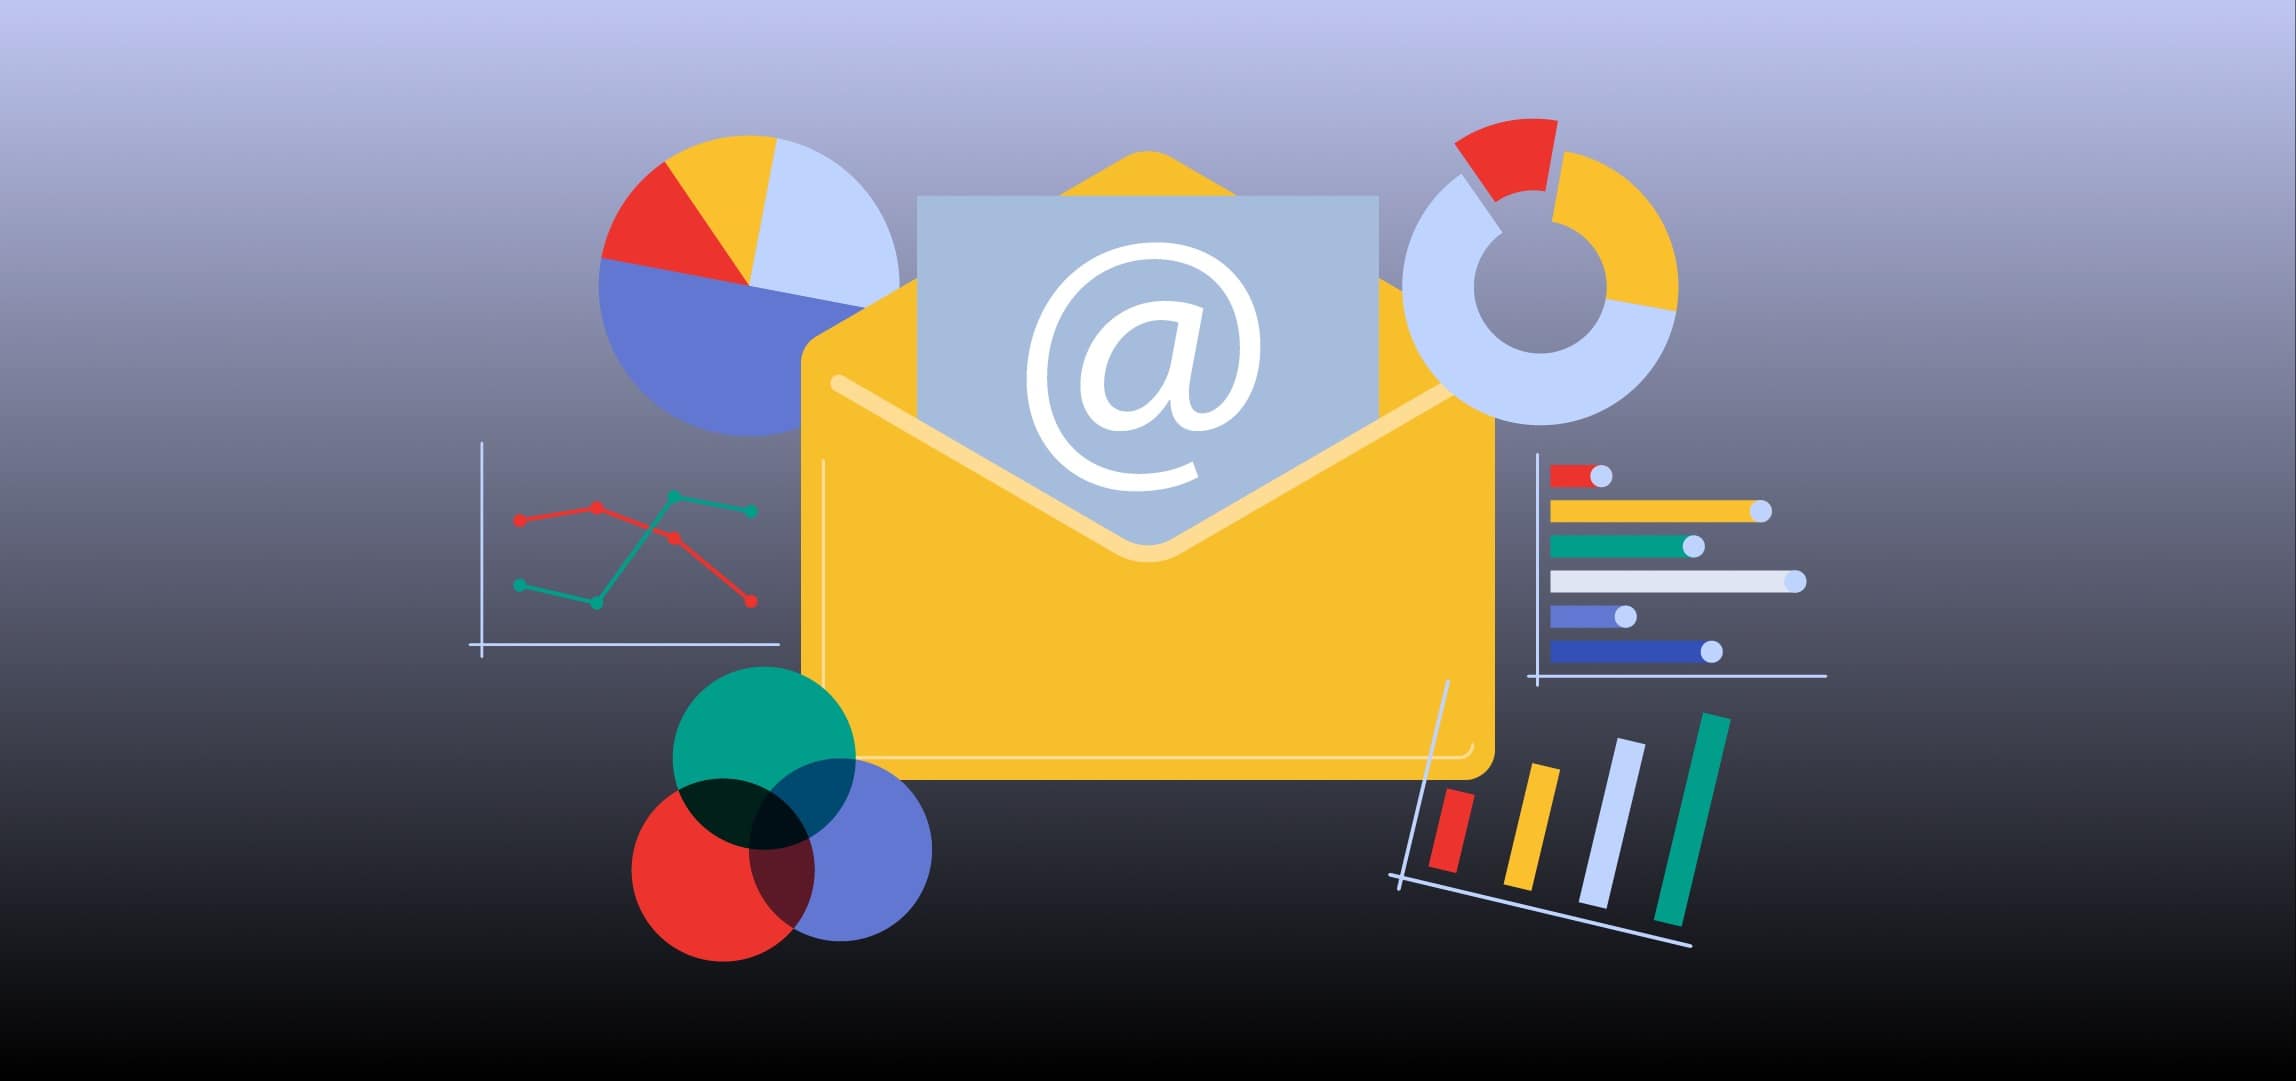 how to organize email gmail